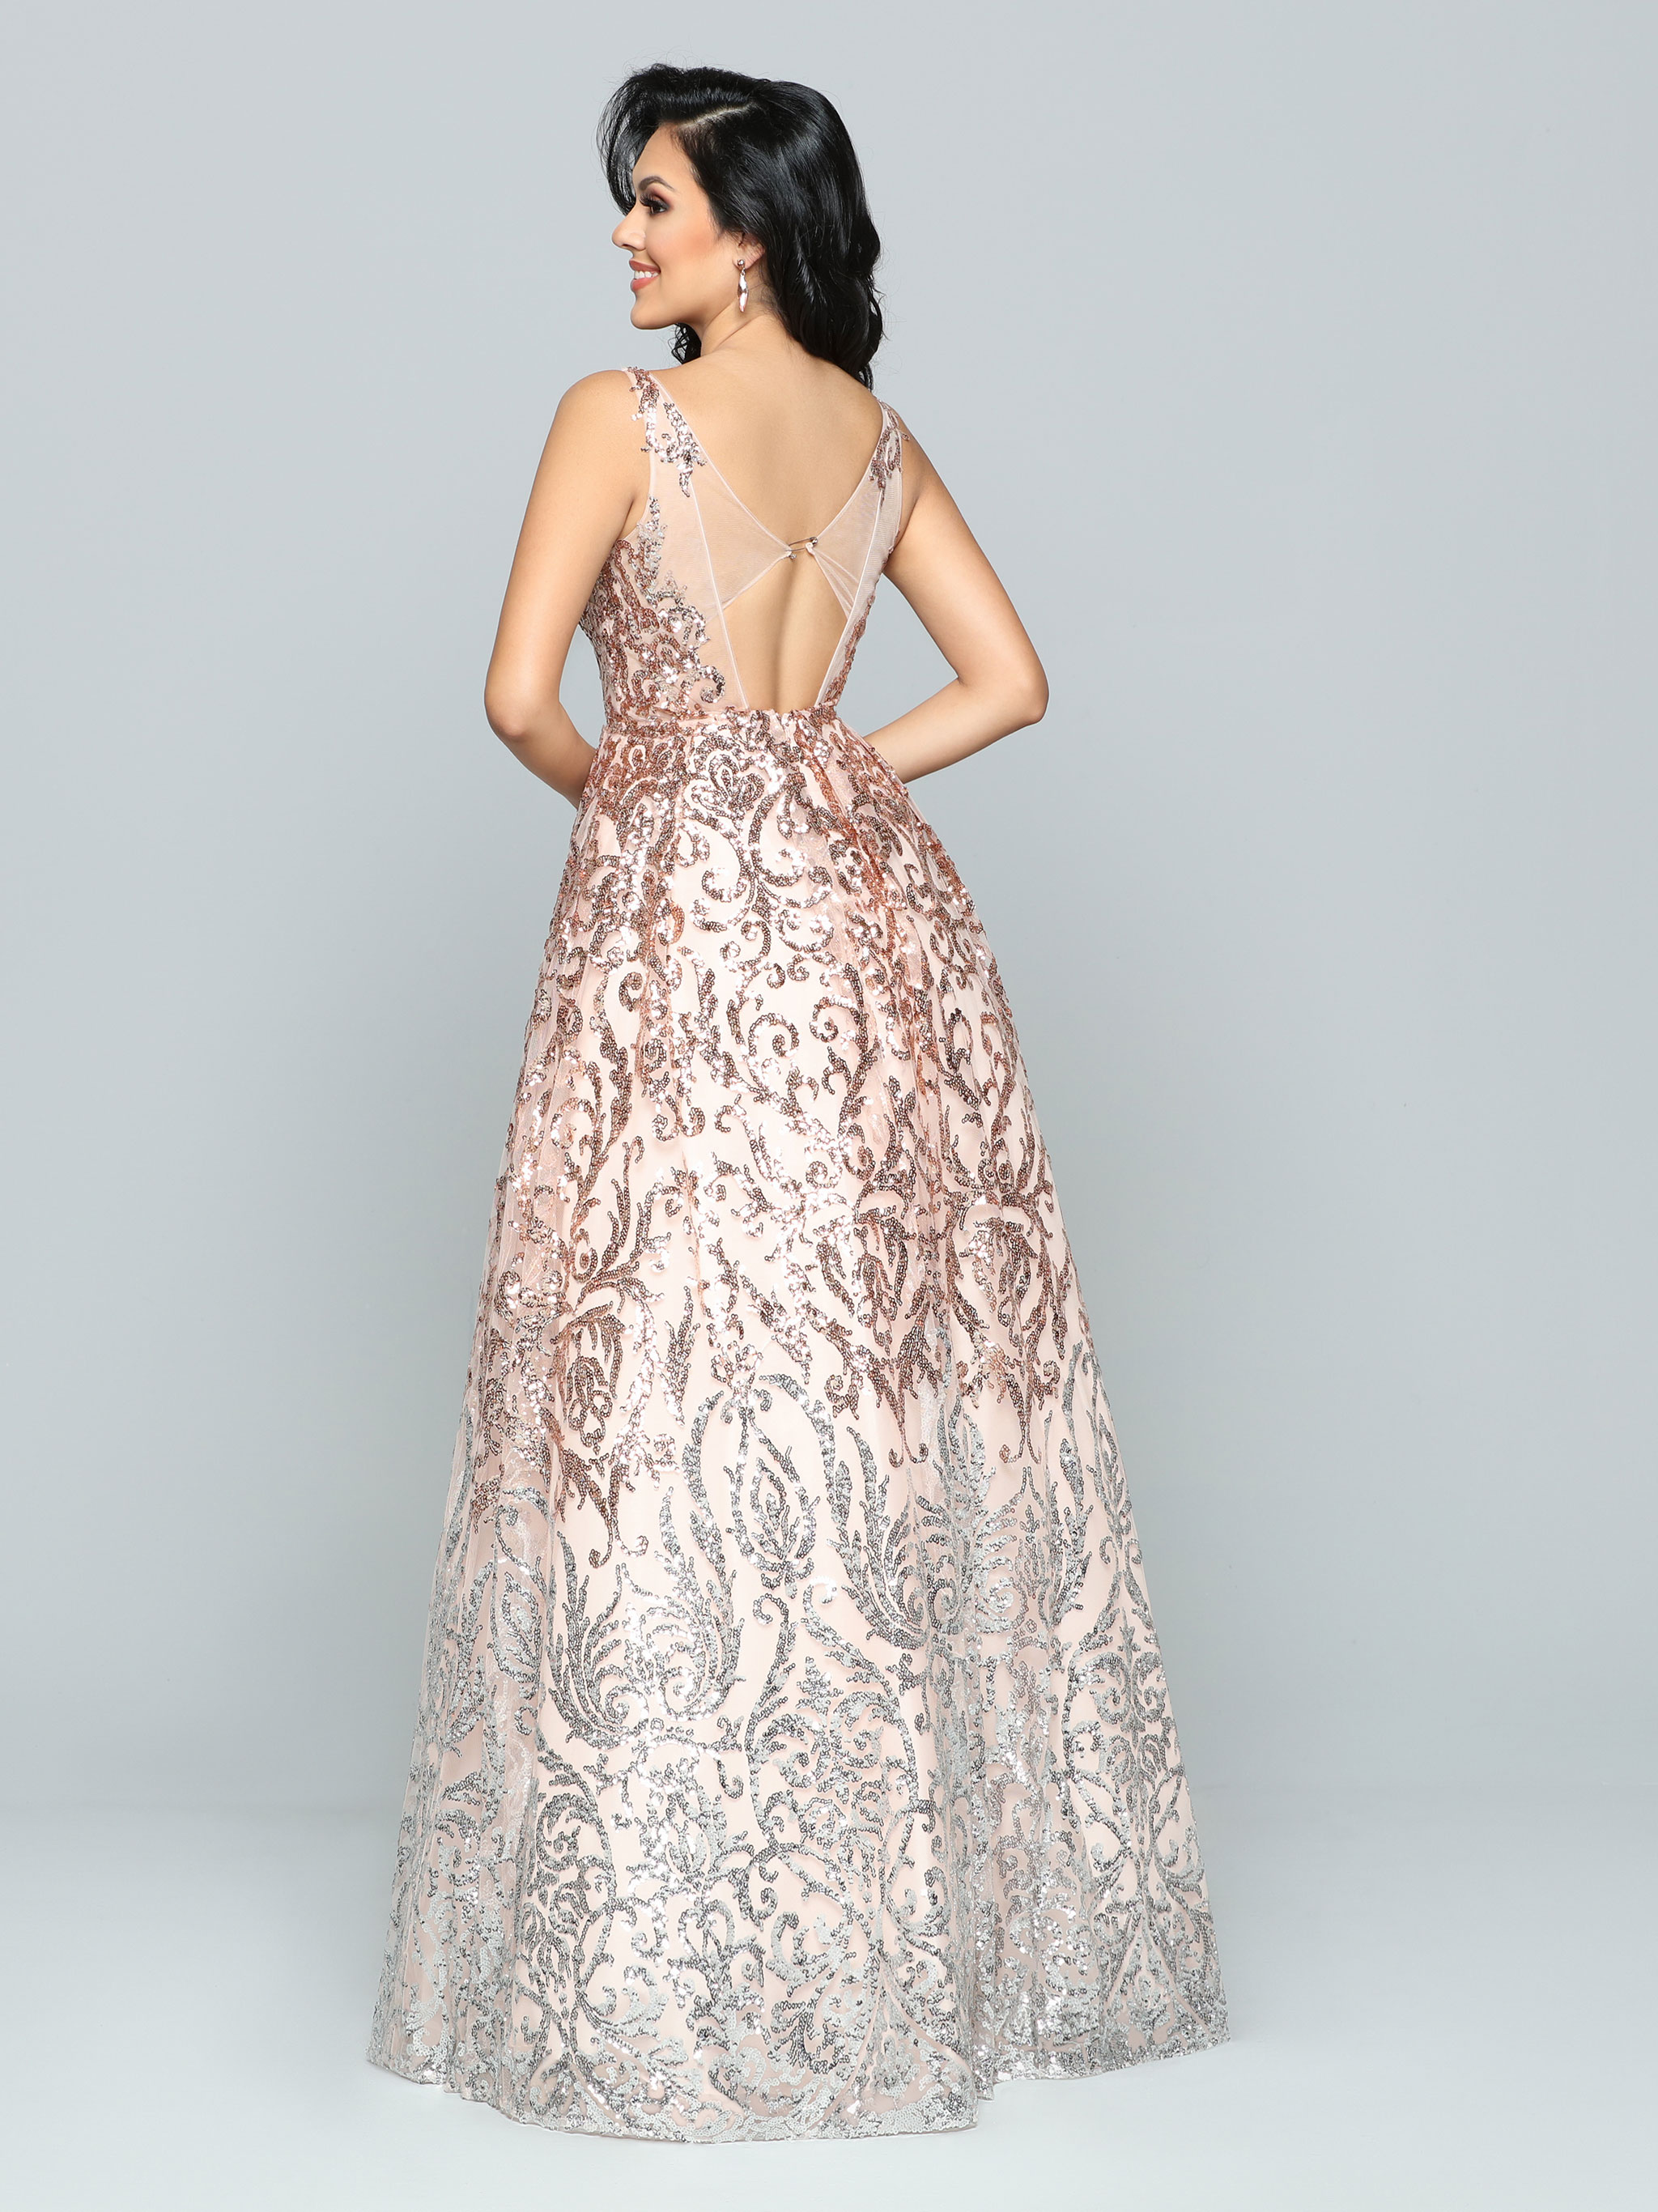 Image showing back view of style #72167